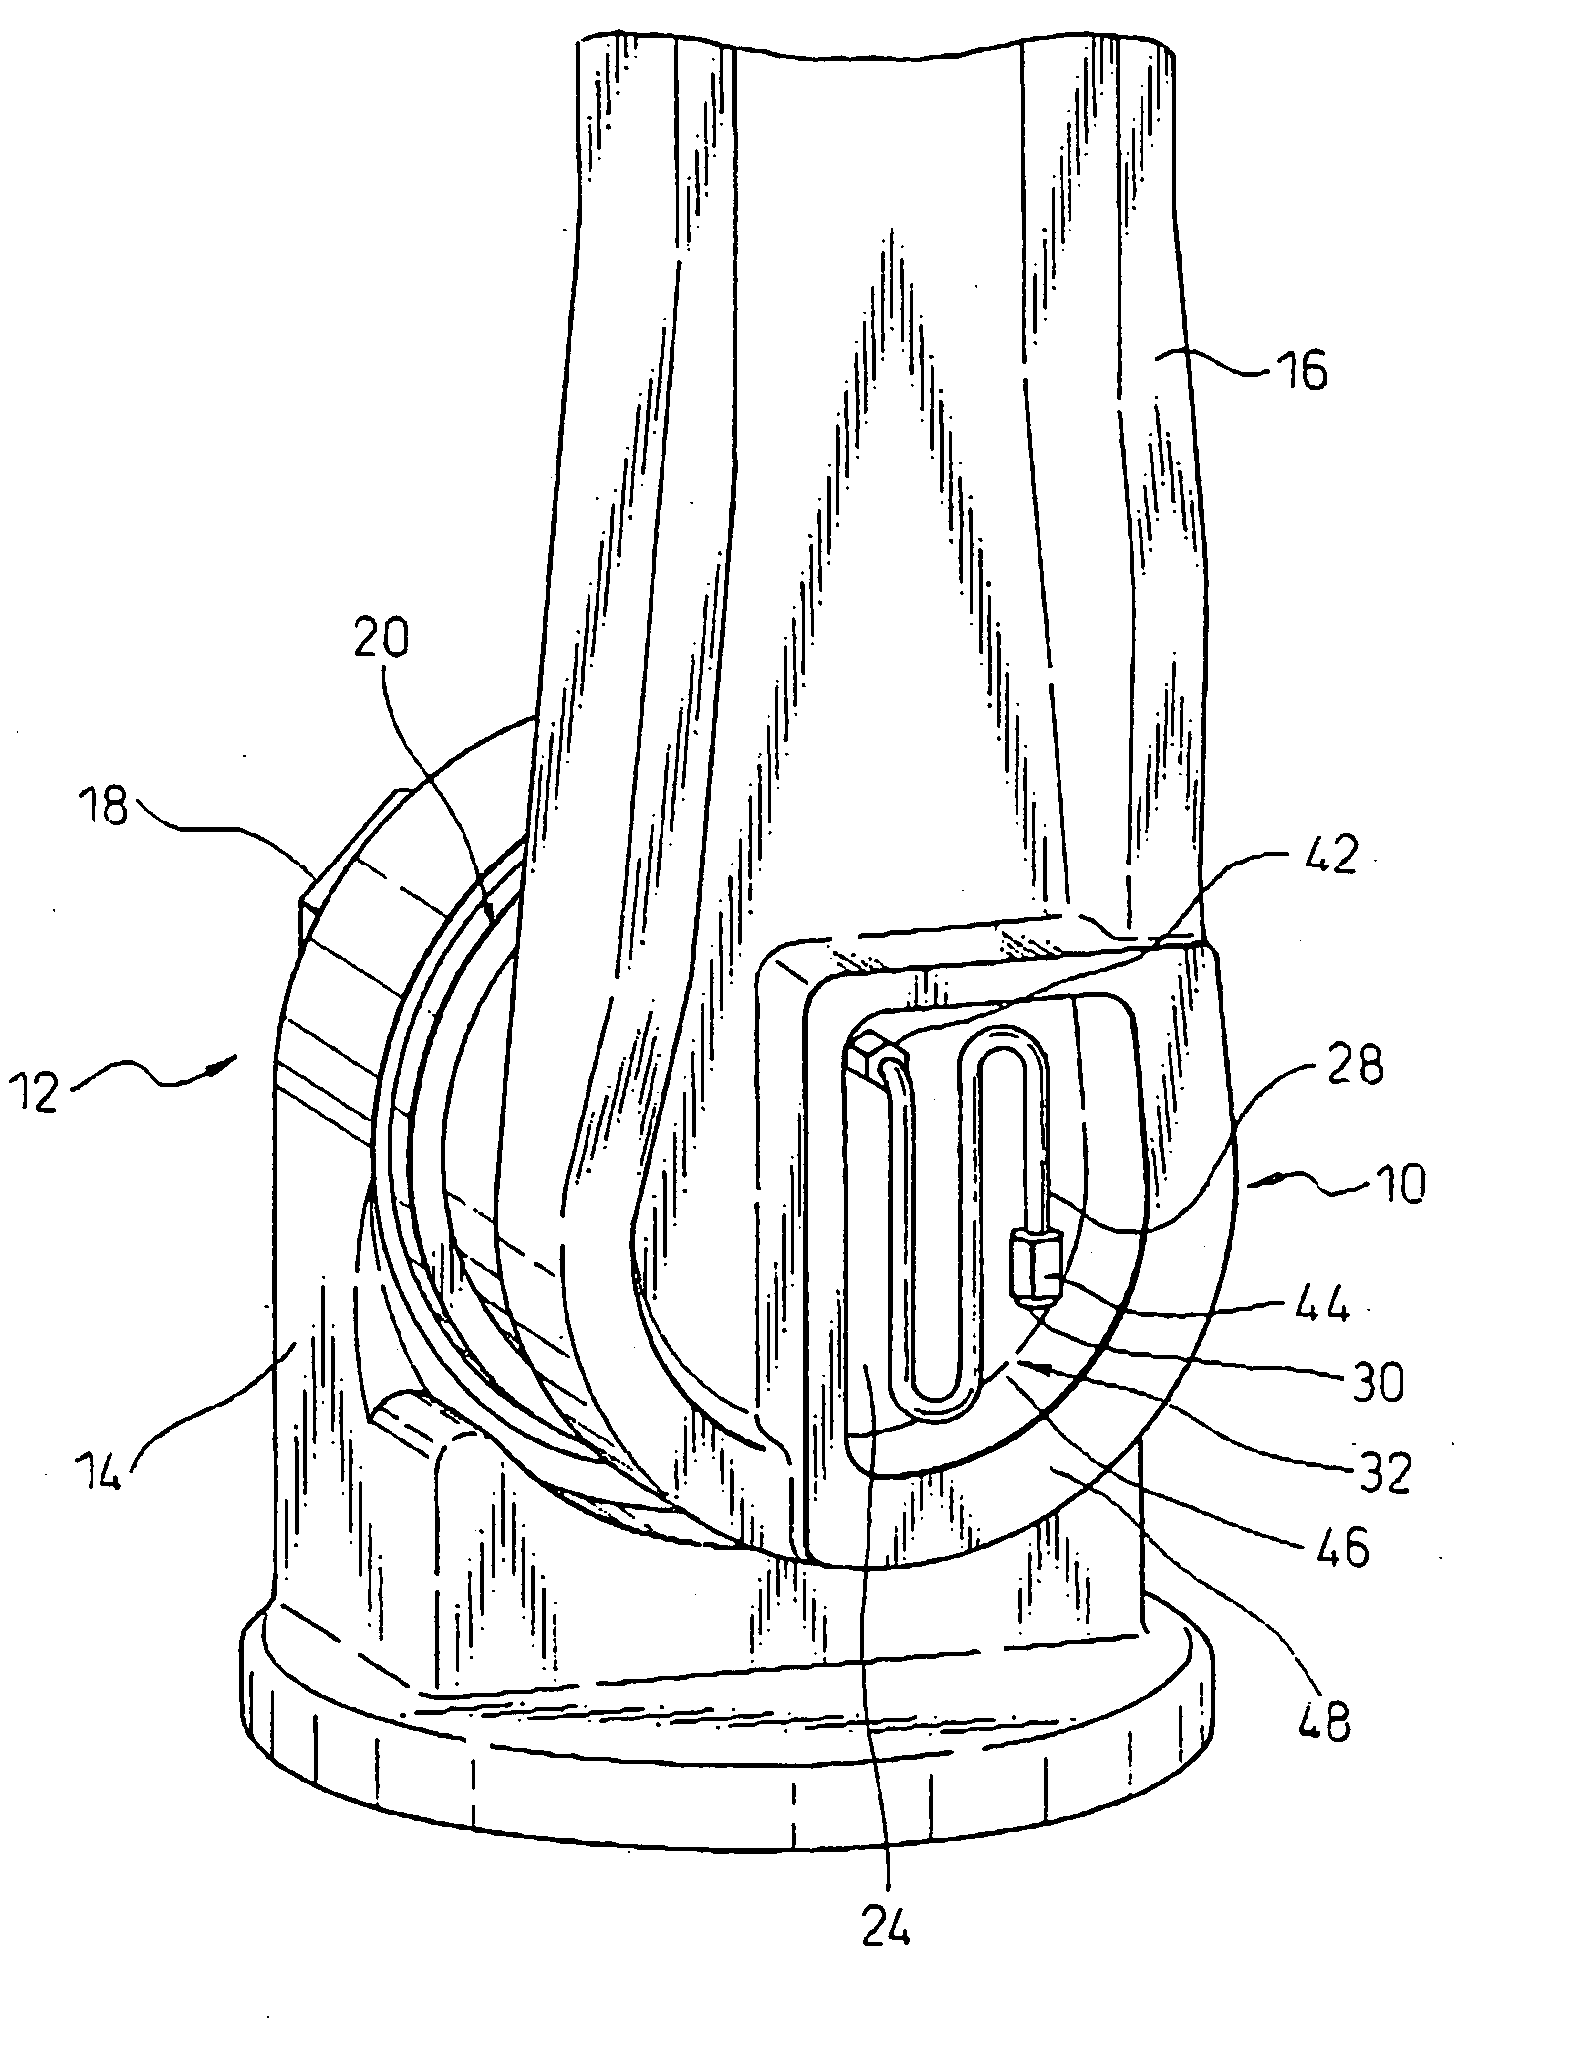 Lubricant draining device